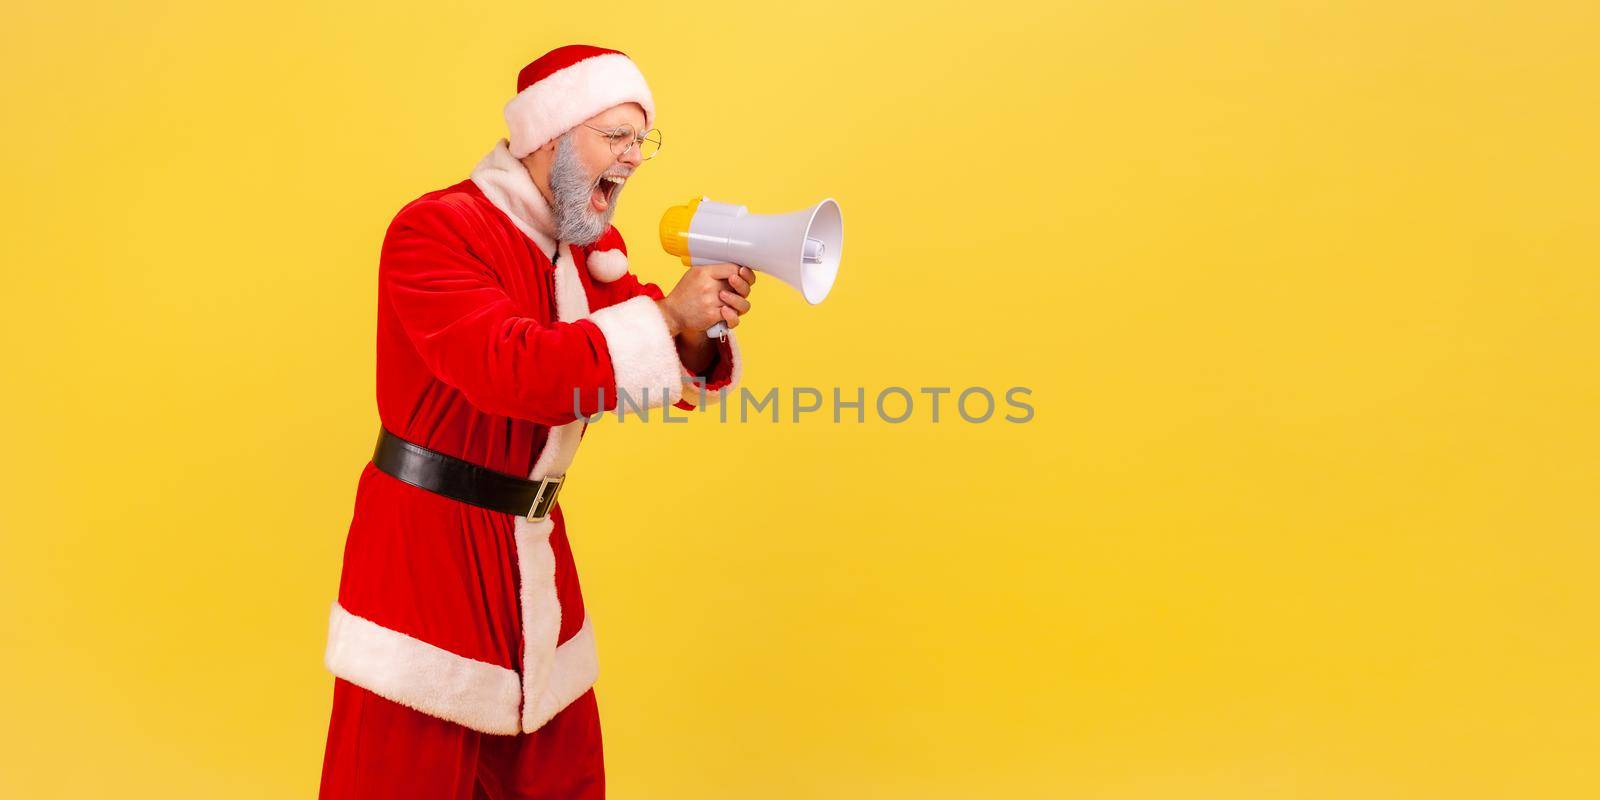 Side view of angry screaming elderly man with gray beard wearing santa claus costume holding megaphone and yelling with aggressive expression. Indoor studio shot isolated on yellow background.